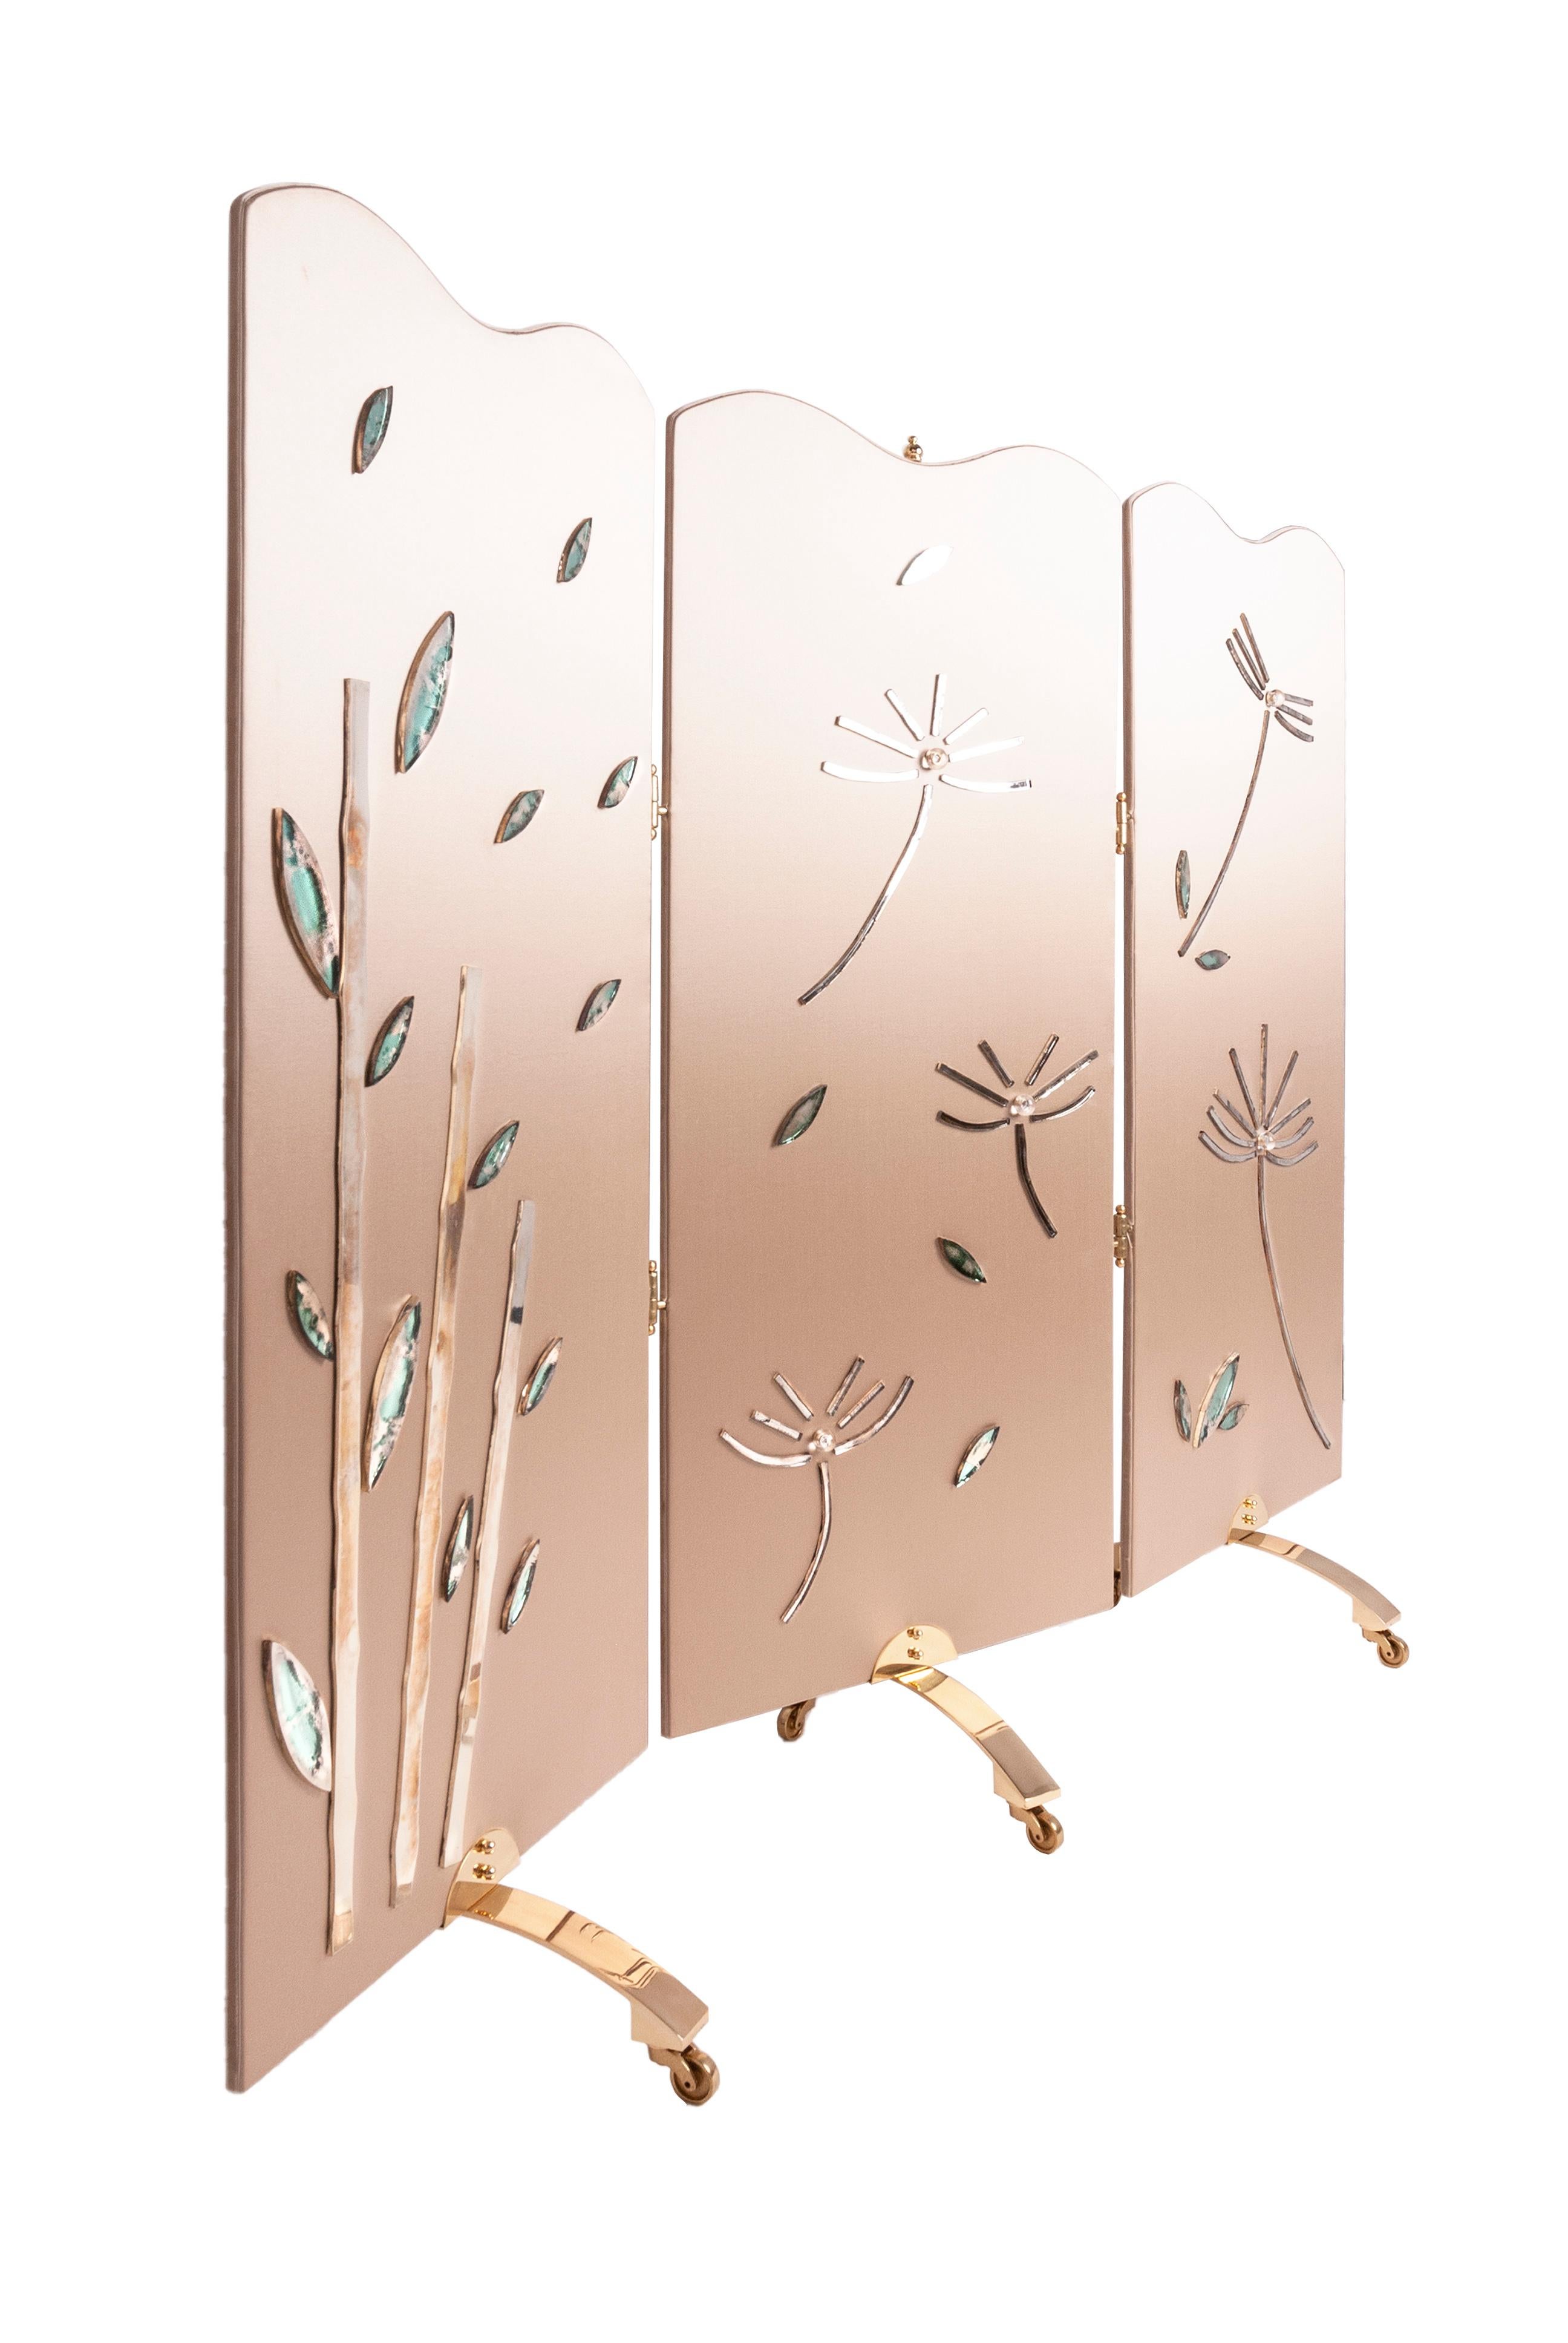 This Secrets screen is a contemporary work of art, entirely handmade in Tuscany, Italy, 100% of Italian origin.

Three solid birch wood panels covered in satin silk, with its Lotus leaf and petals, bamboo leaves, dandelion flowers, embedded pyrite